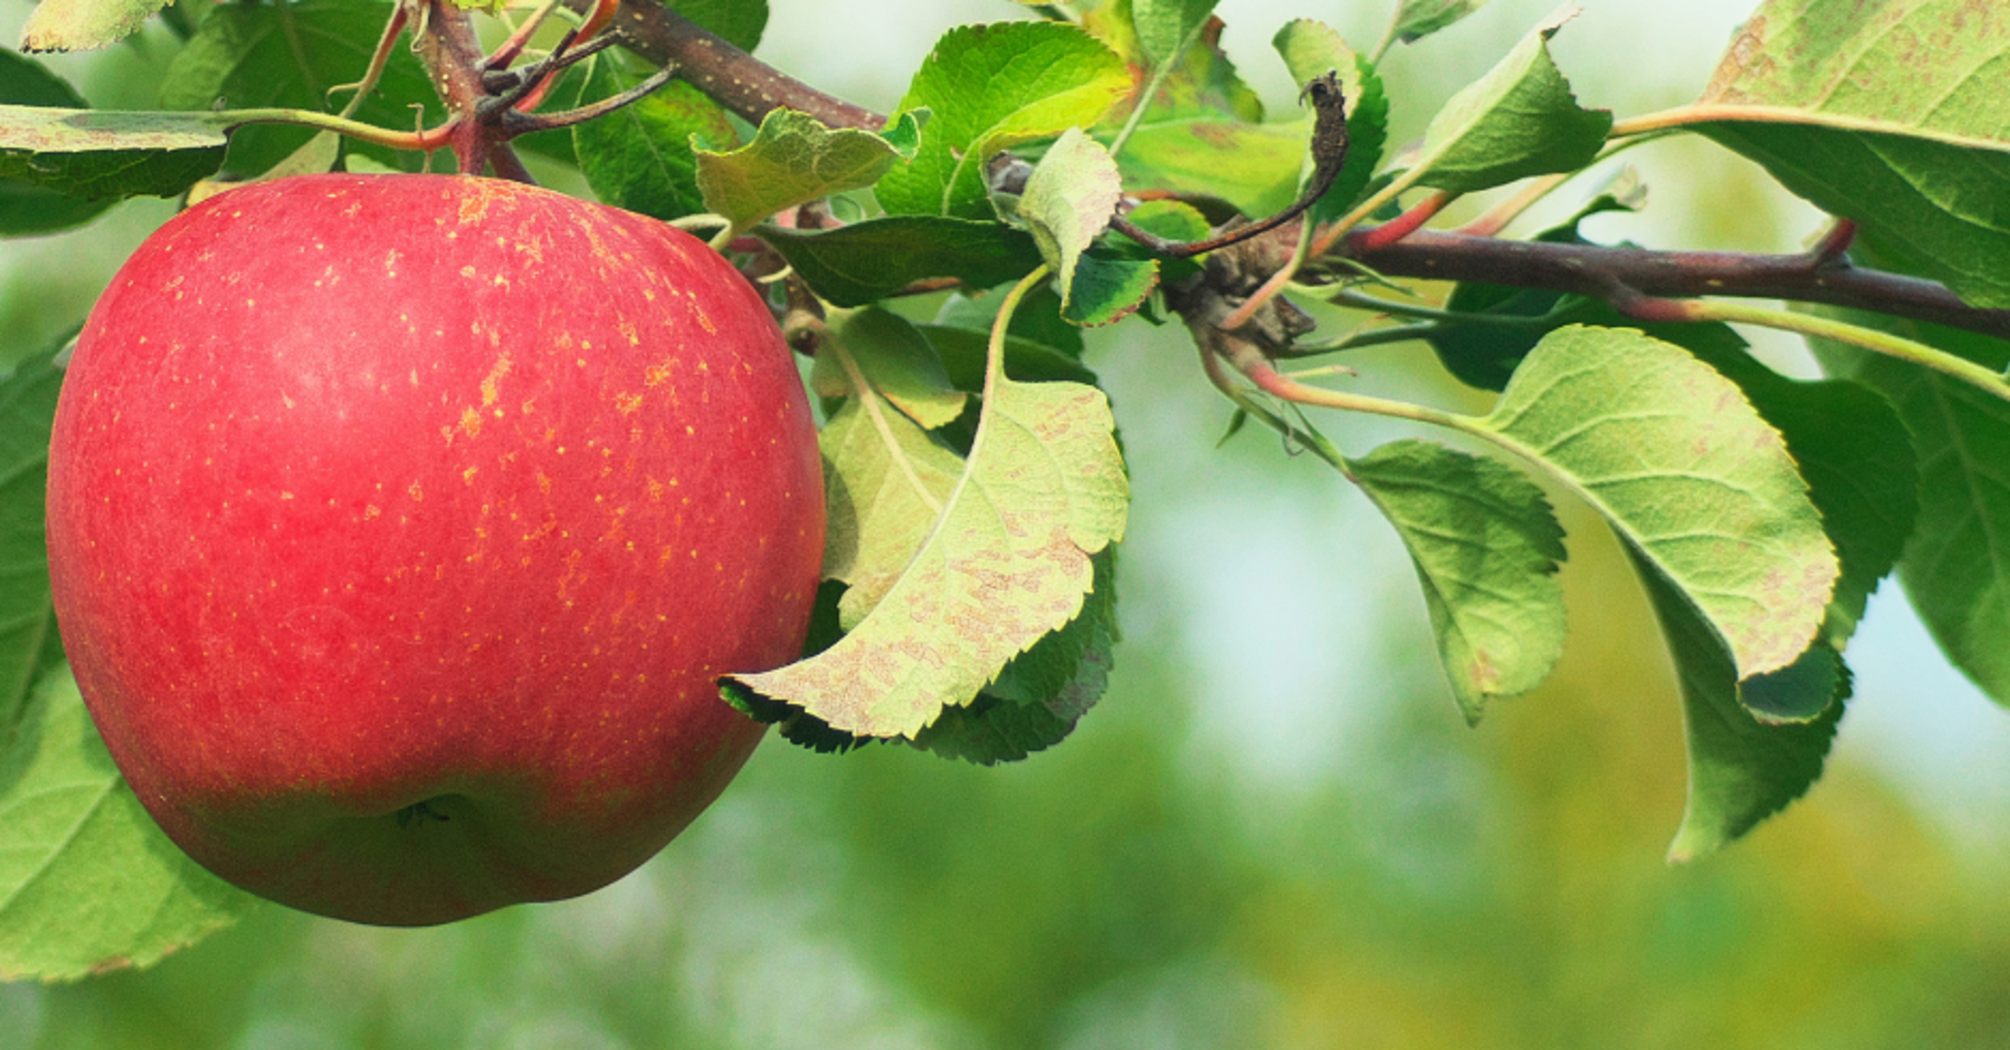 Feed your apple trees with these "vitamins"